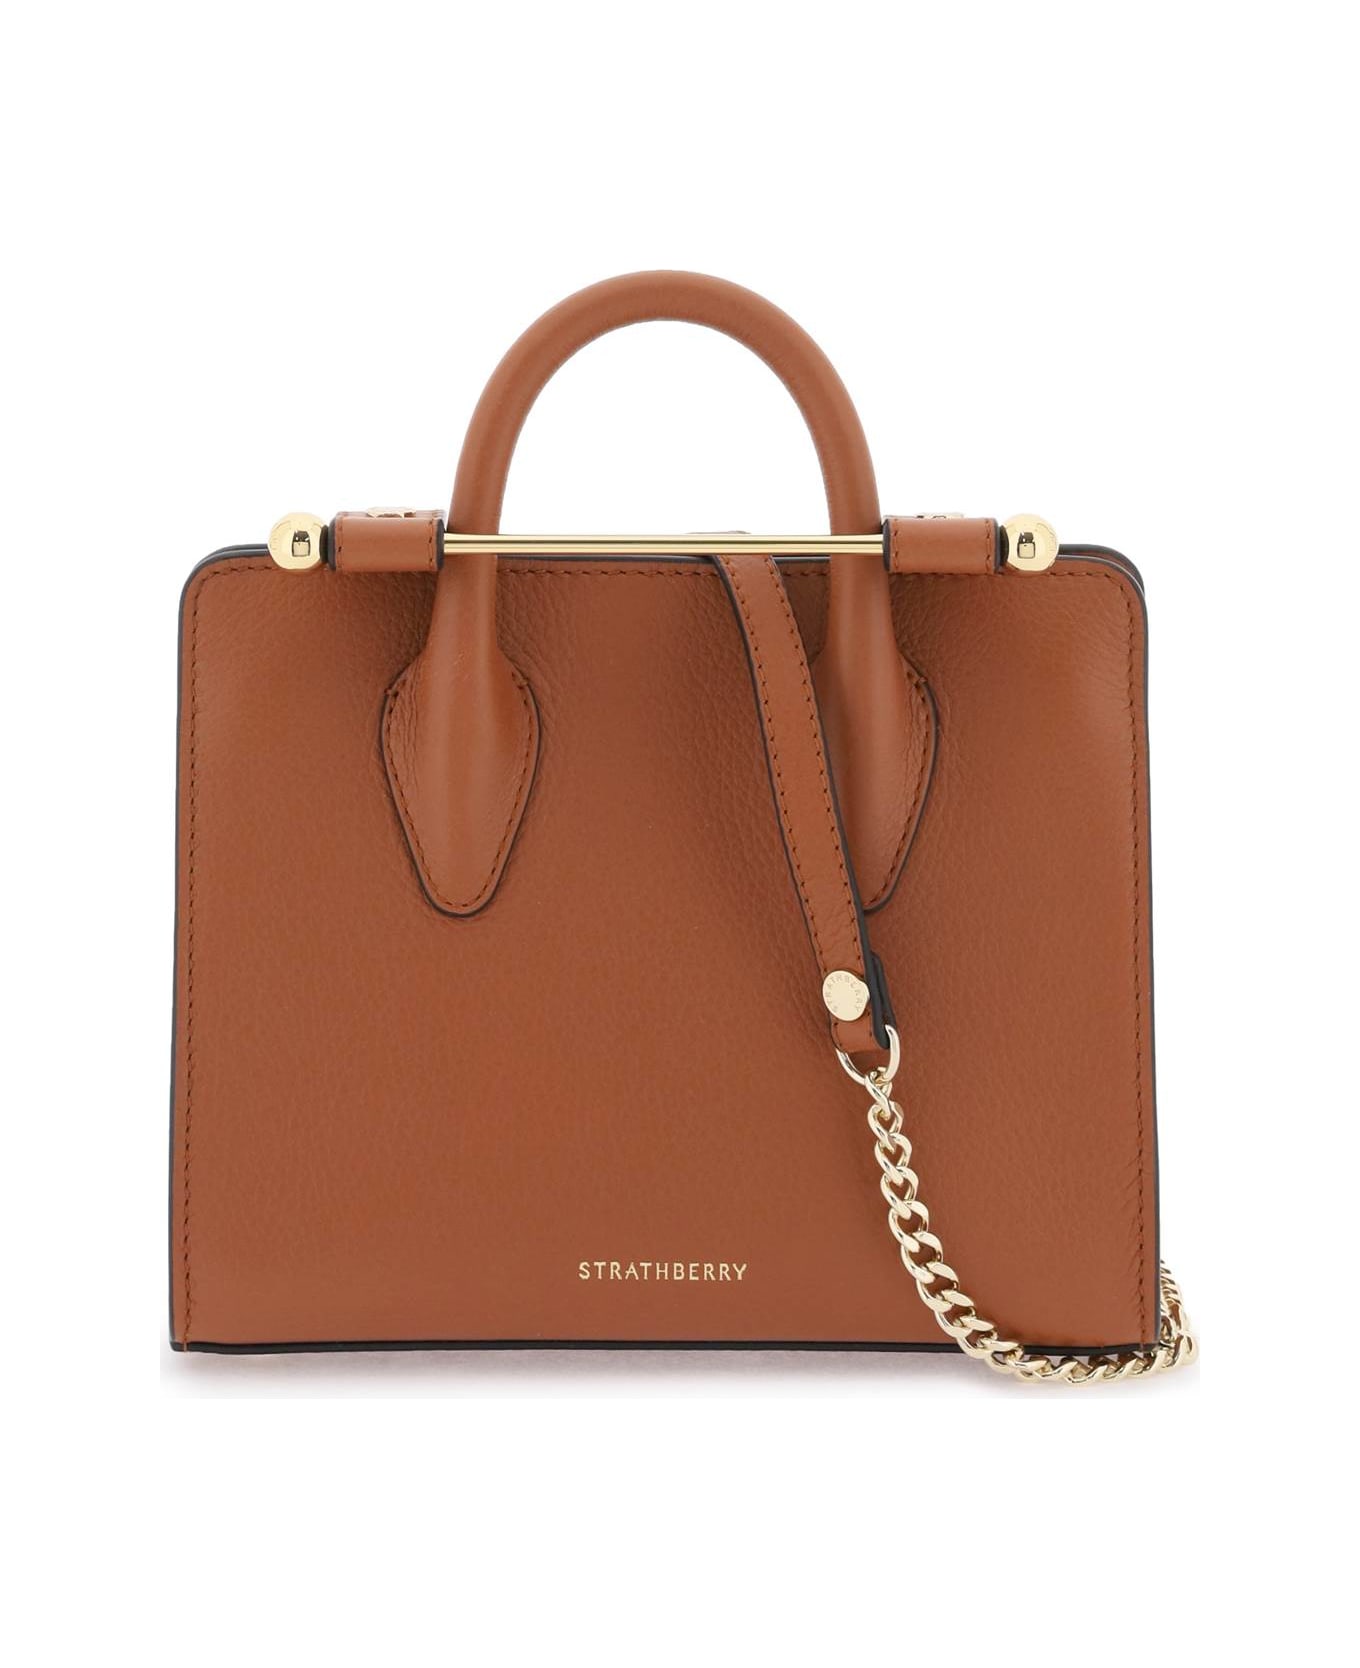 Strathberry Nano Tote Leather Bag - CHESTNUT (Brown)